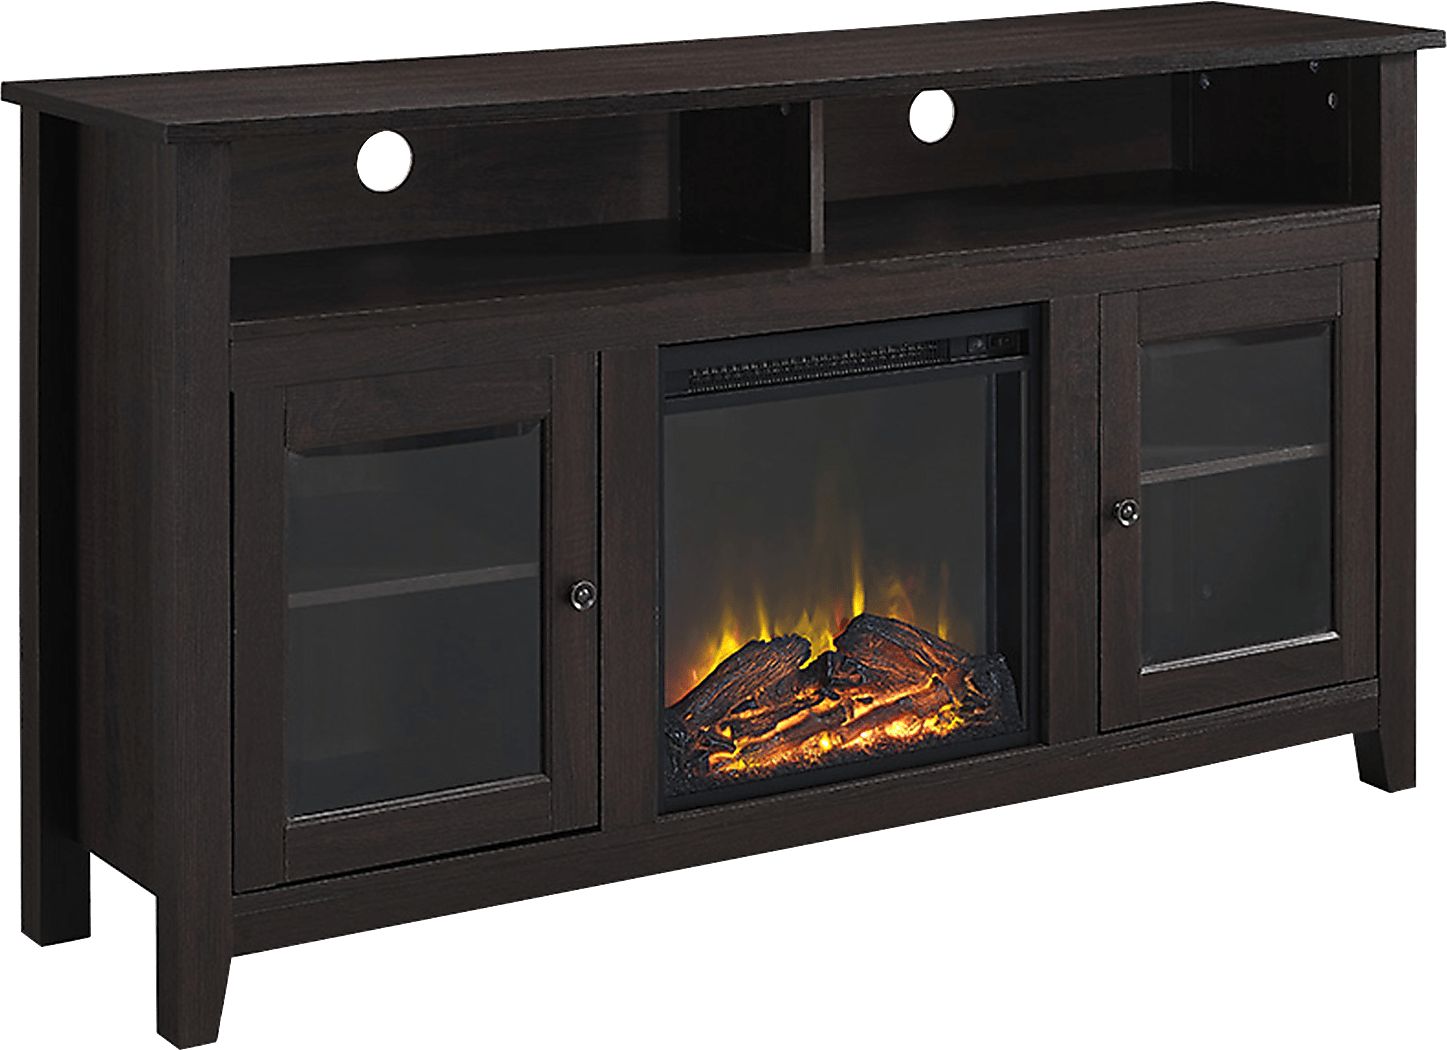 Winfield Trace Espresso 58 in. Console with Electric Fireplace